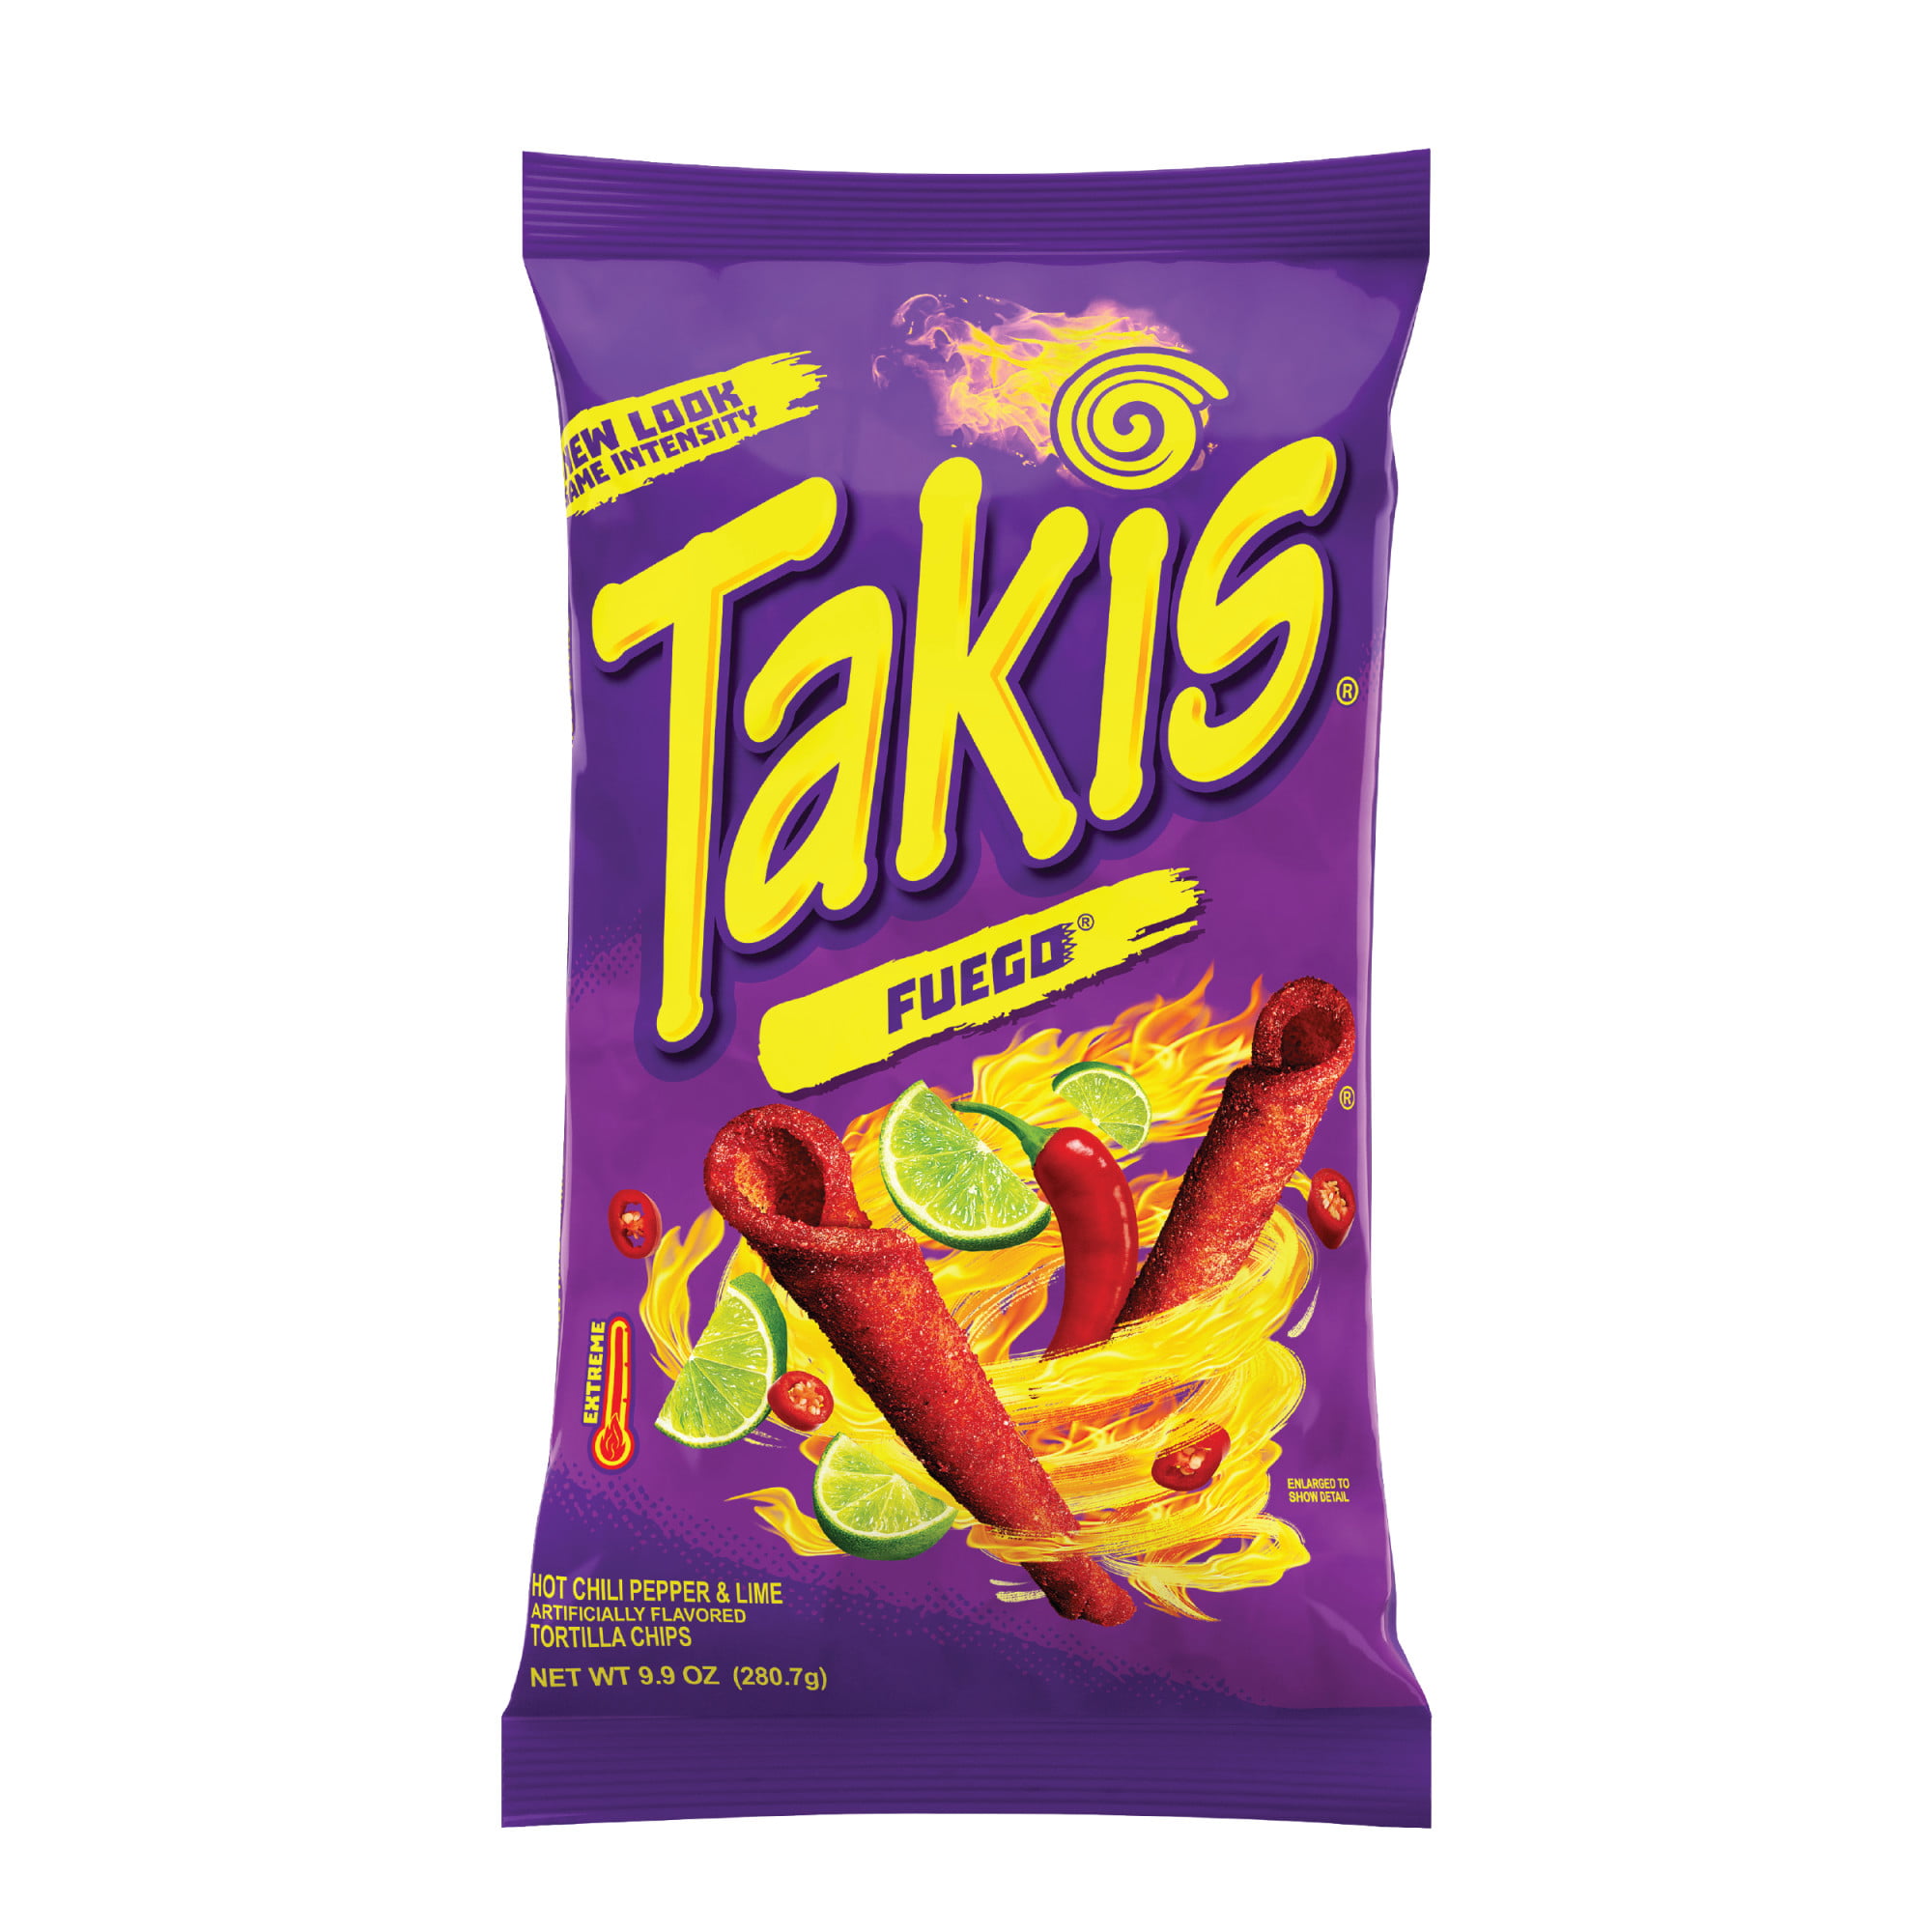 Takis Fuego Rolls 9.9 oz Bag,  Hot Chili Pepper & Lime Flavored Spicy Tortilla Chips